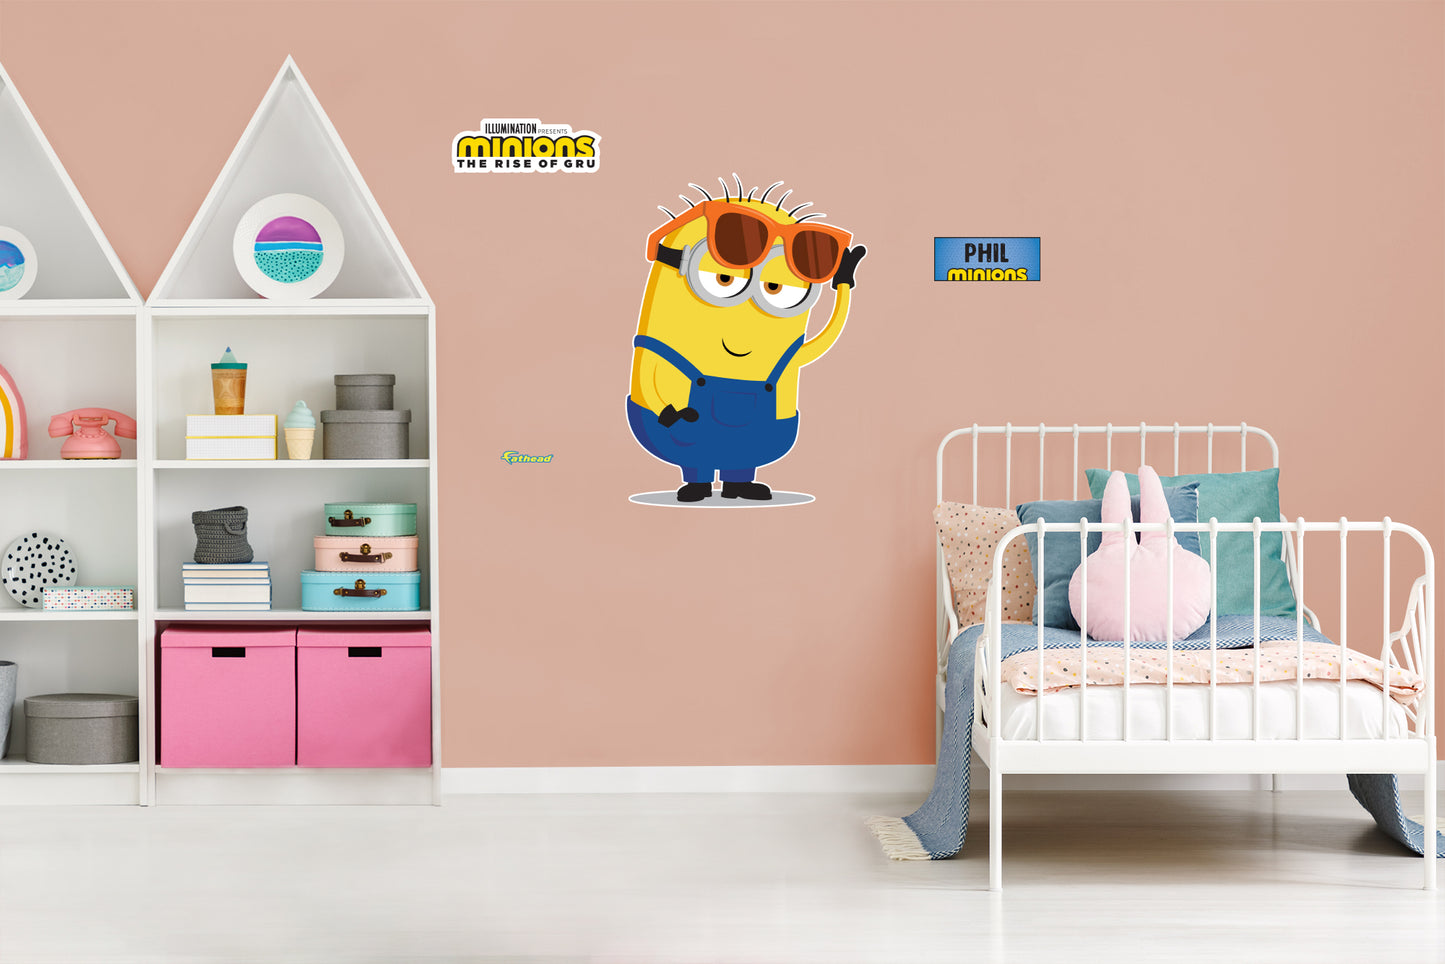 8 Inch Dr Nefario Doctor Minion Despicable Me Removable Wall Decal Sticker  Art Home Decor Kids Room-8 Inch Wide by 8 1/2 Inch Tall